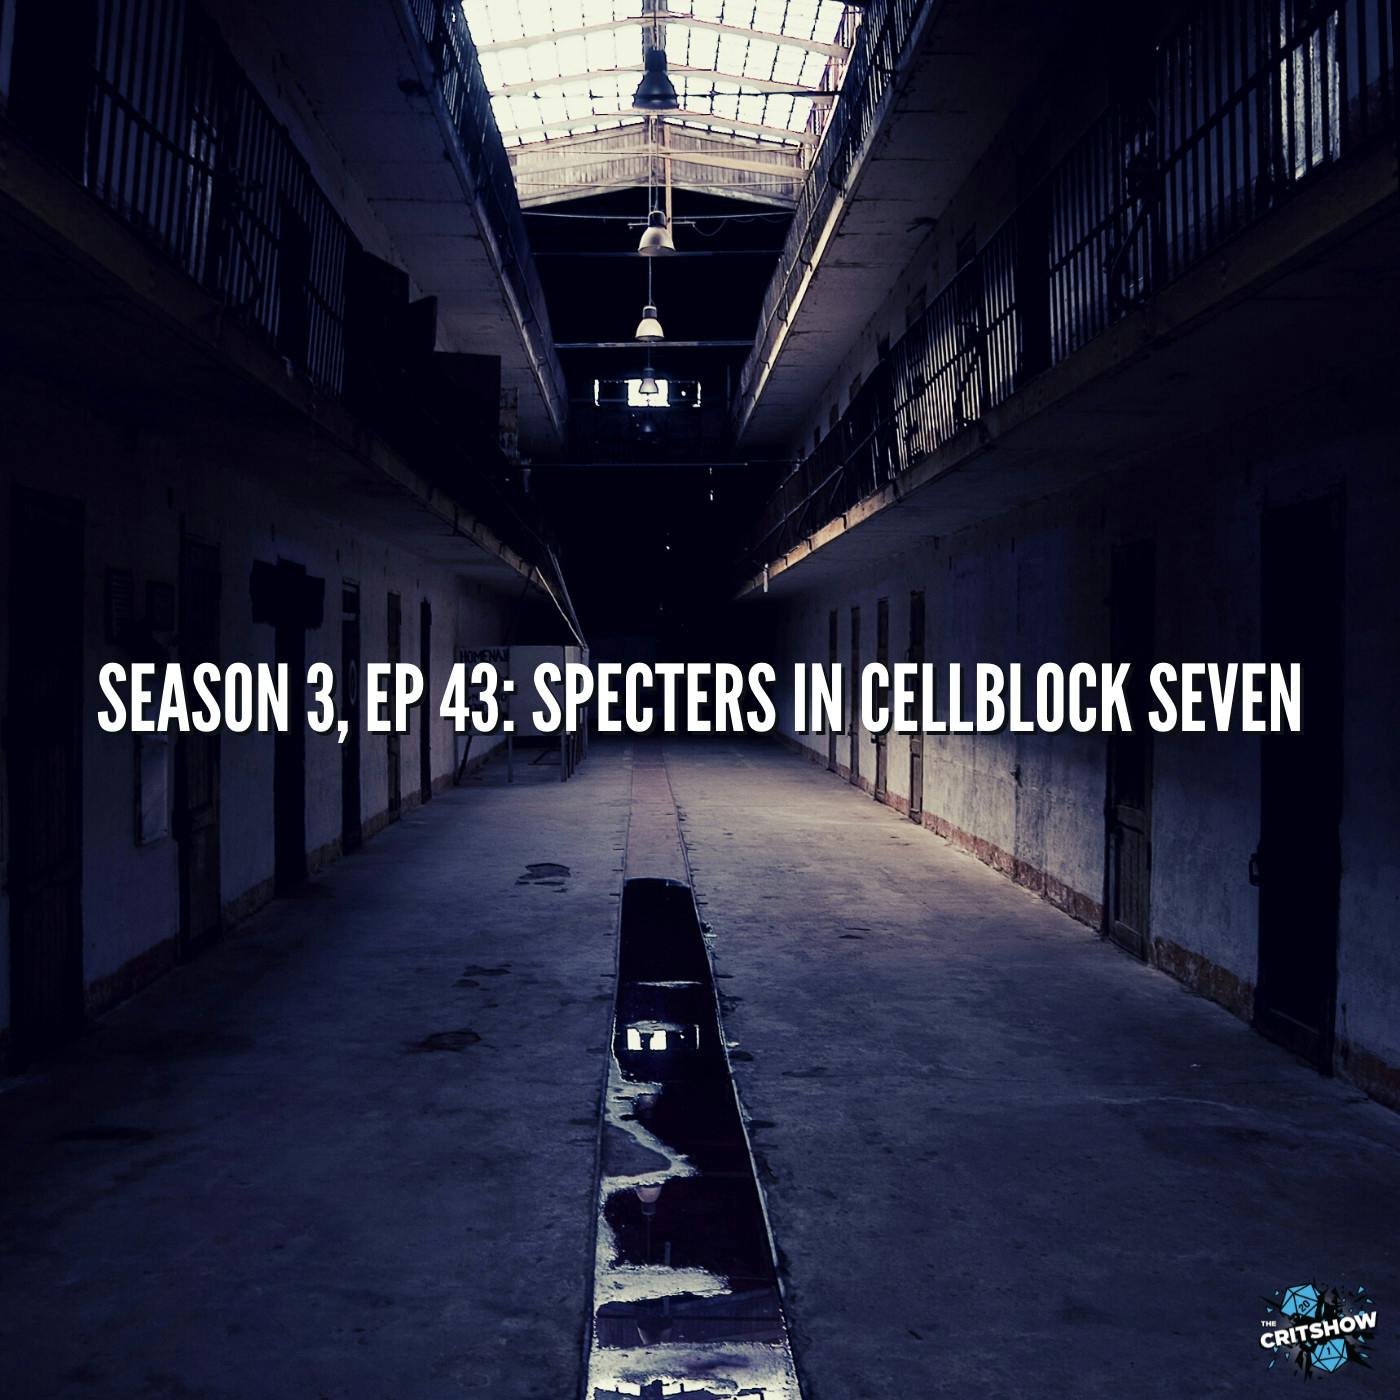 Specters in Cell Block Seven (S3, E43)